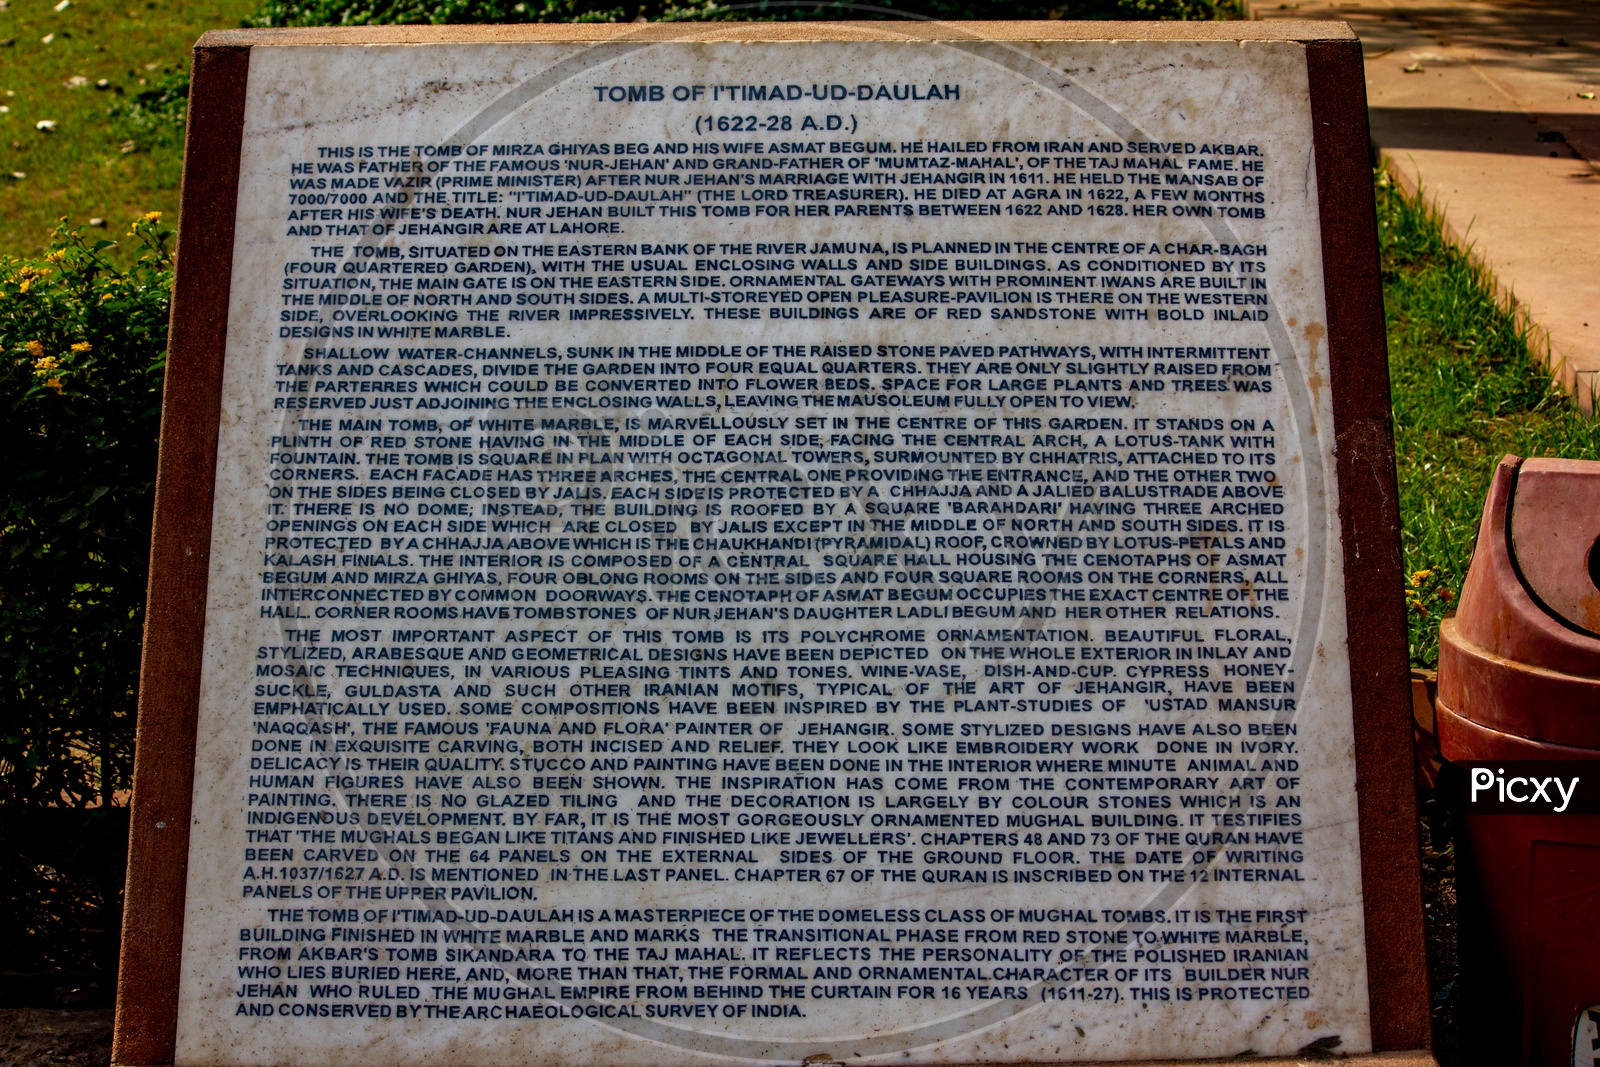 Note about The Tomb of Itimad-Ud-Daulah